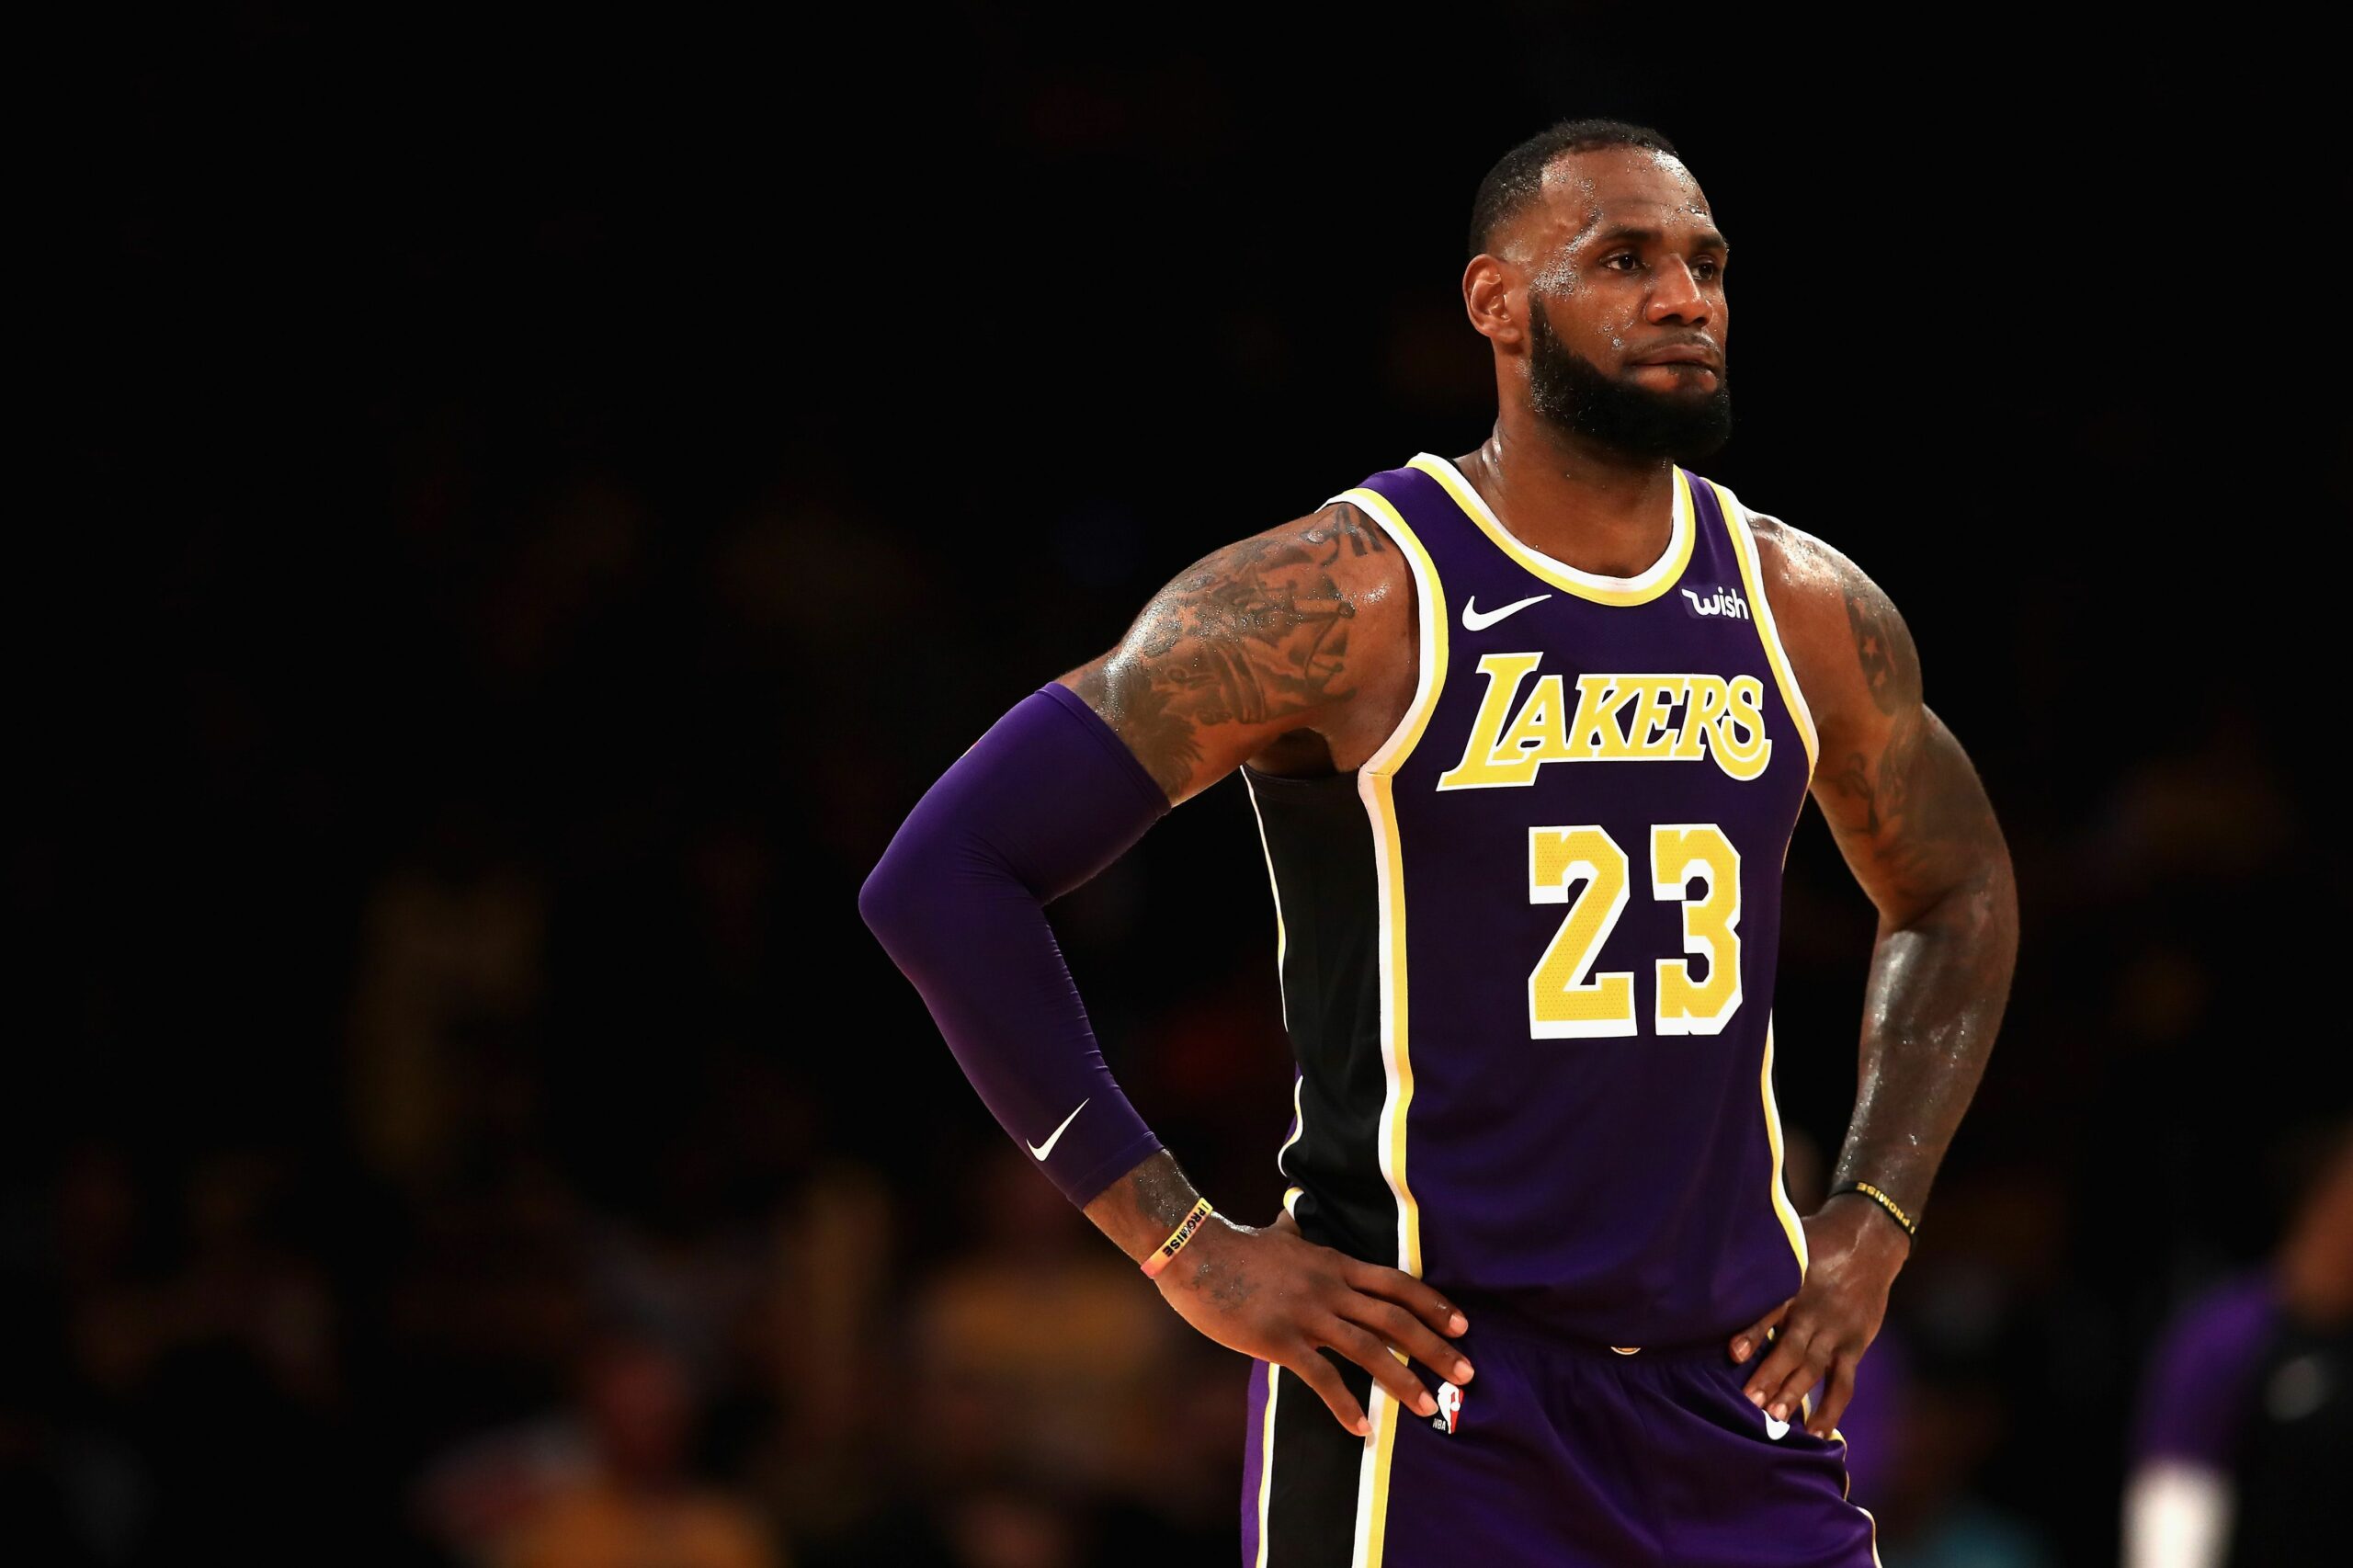 LeBron James #23 of the Los Angeles Lakers looks on during the first half of a game against the New York Knicks at Madison Square Garden on December 25, 2019 in New York City. - NBA